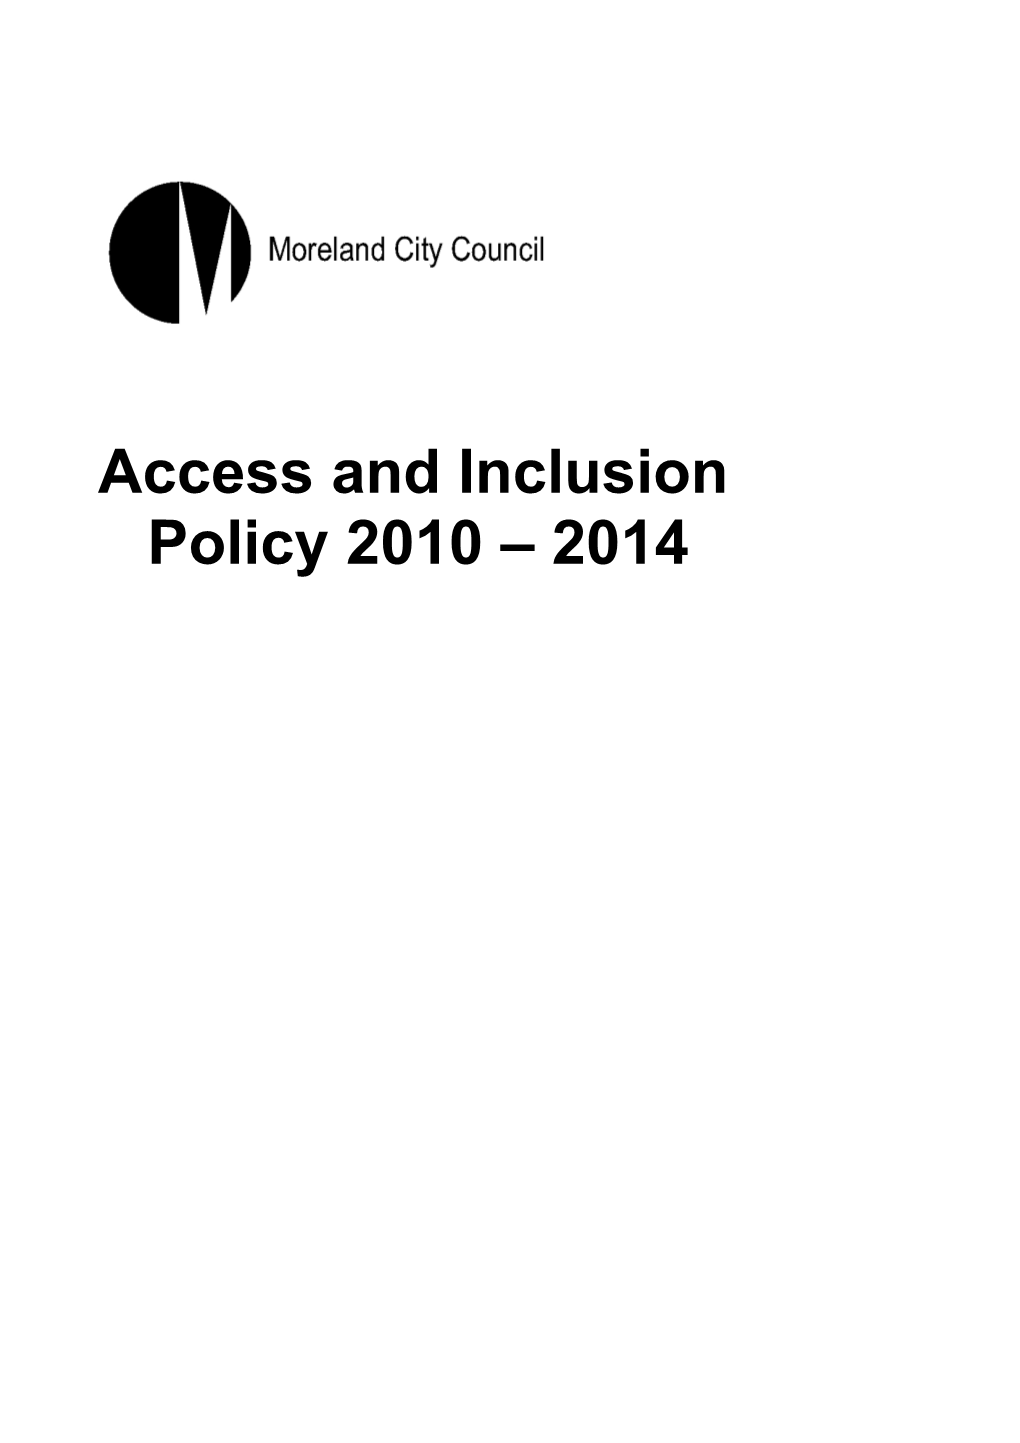 Access and Inclusion Policy 2010 2014